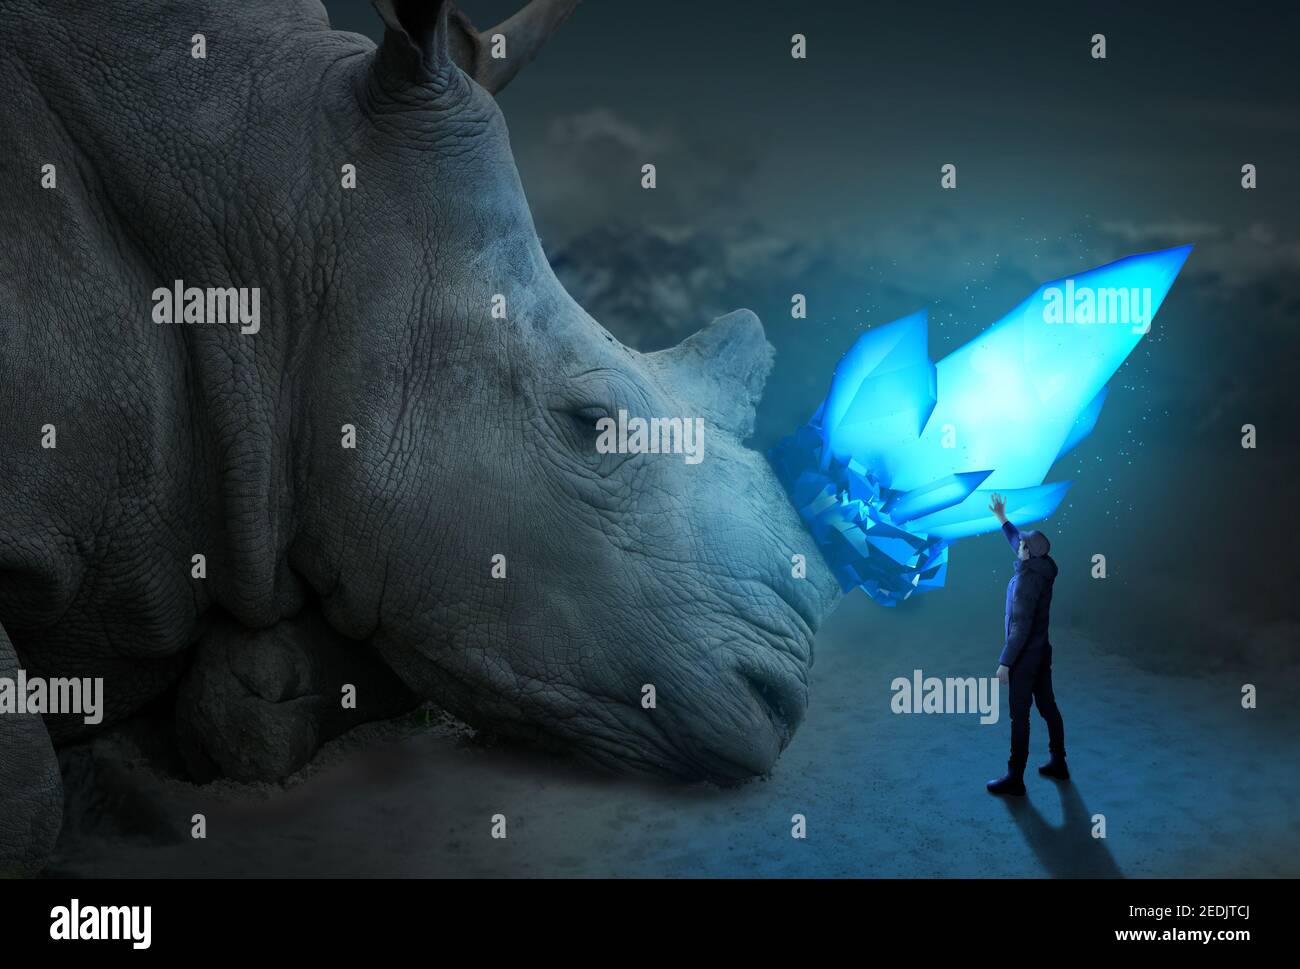 Man has unreal encounter with giant Rhino, blue glowing crystal Stock Photo